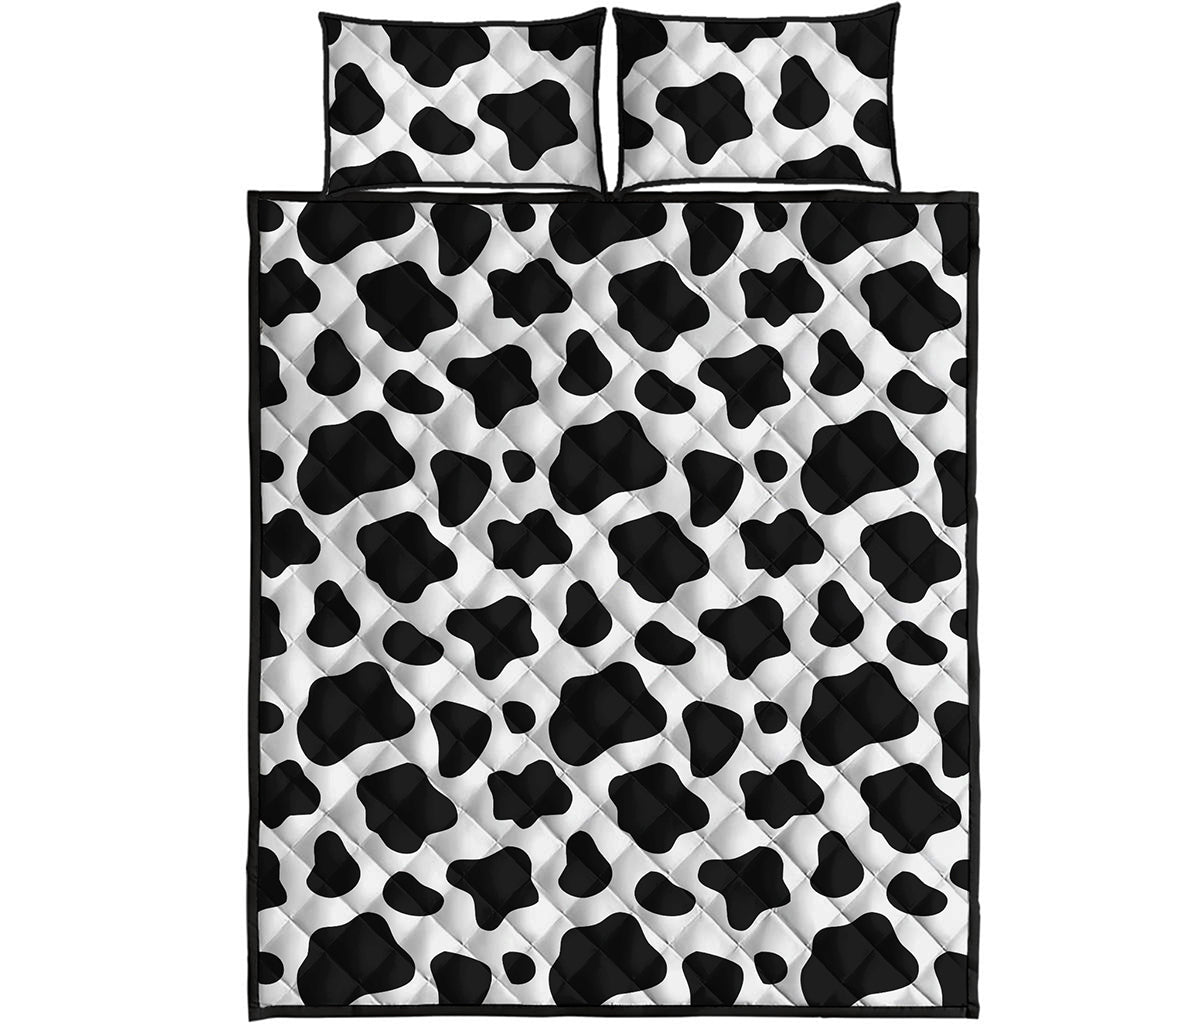 Black And White Cow Print Quilt Bed Set